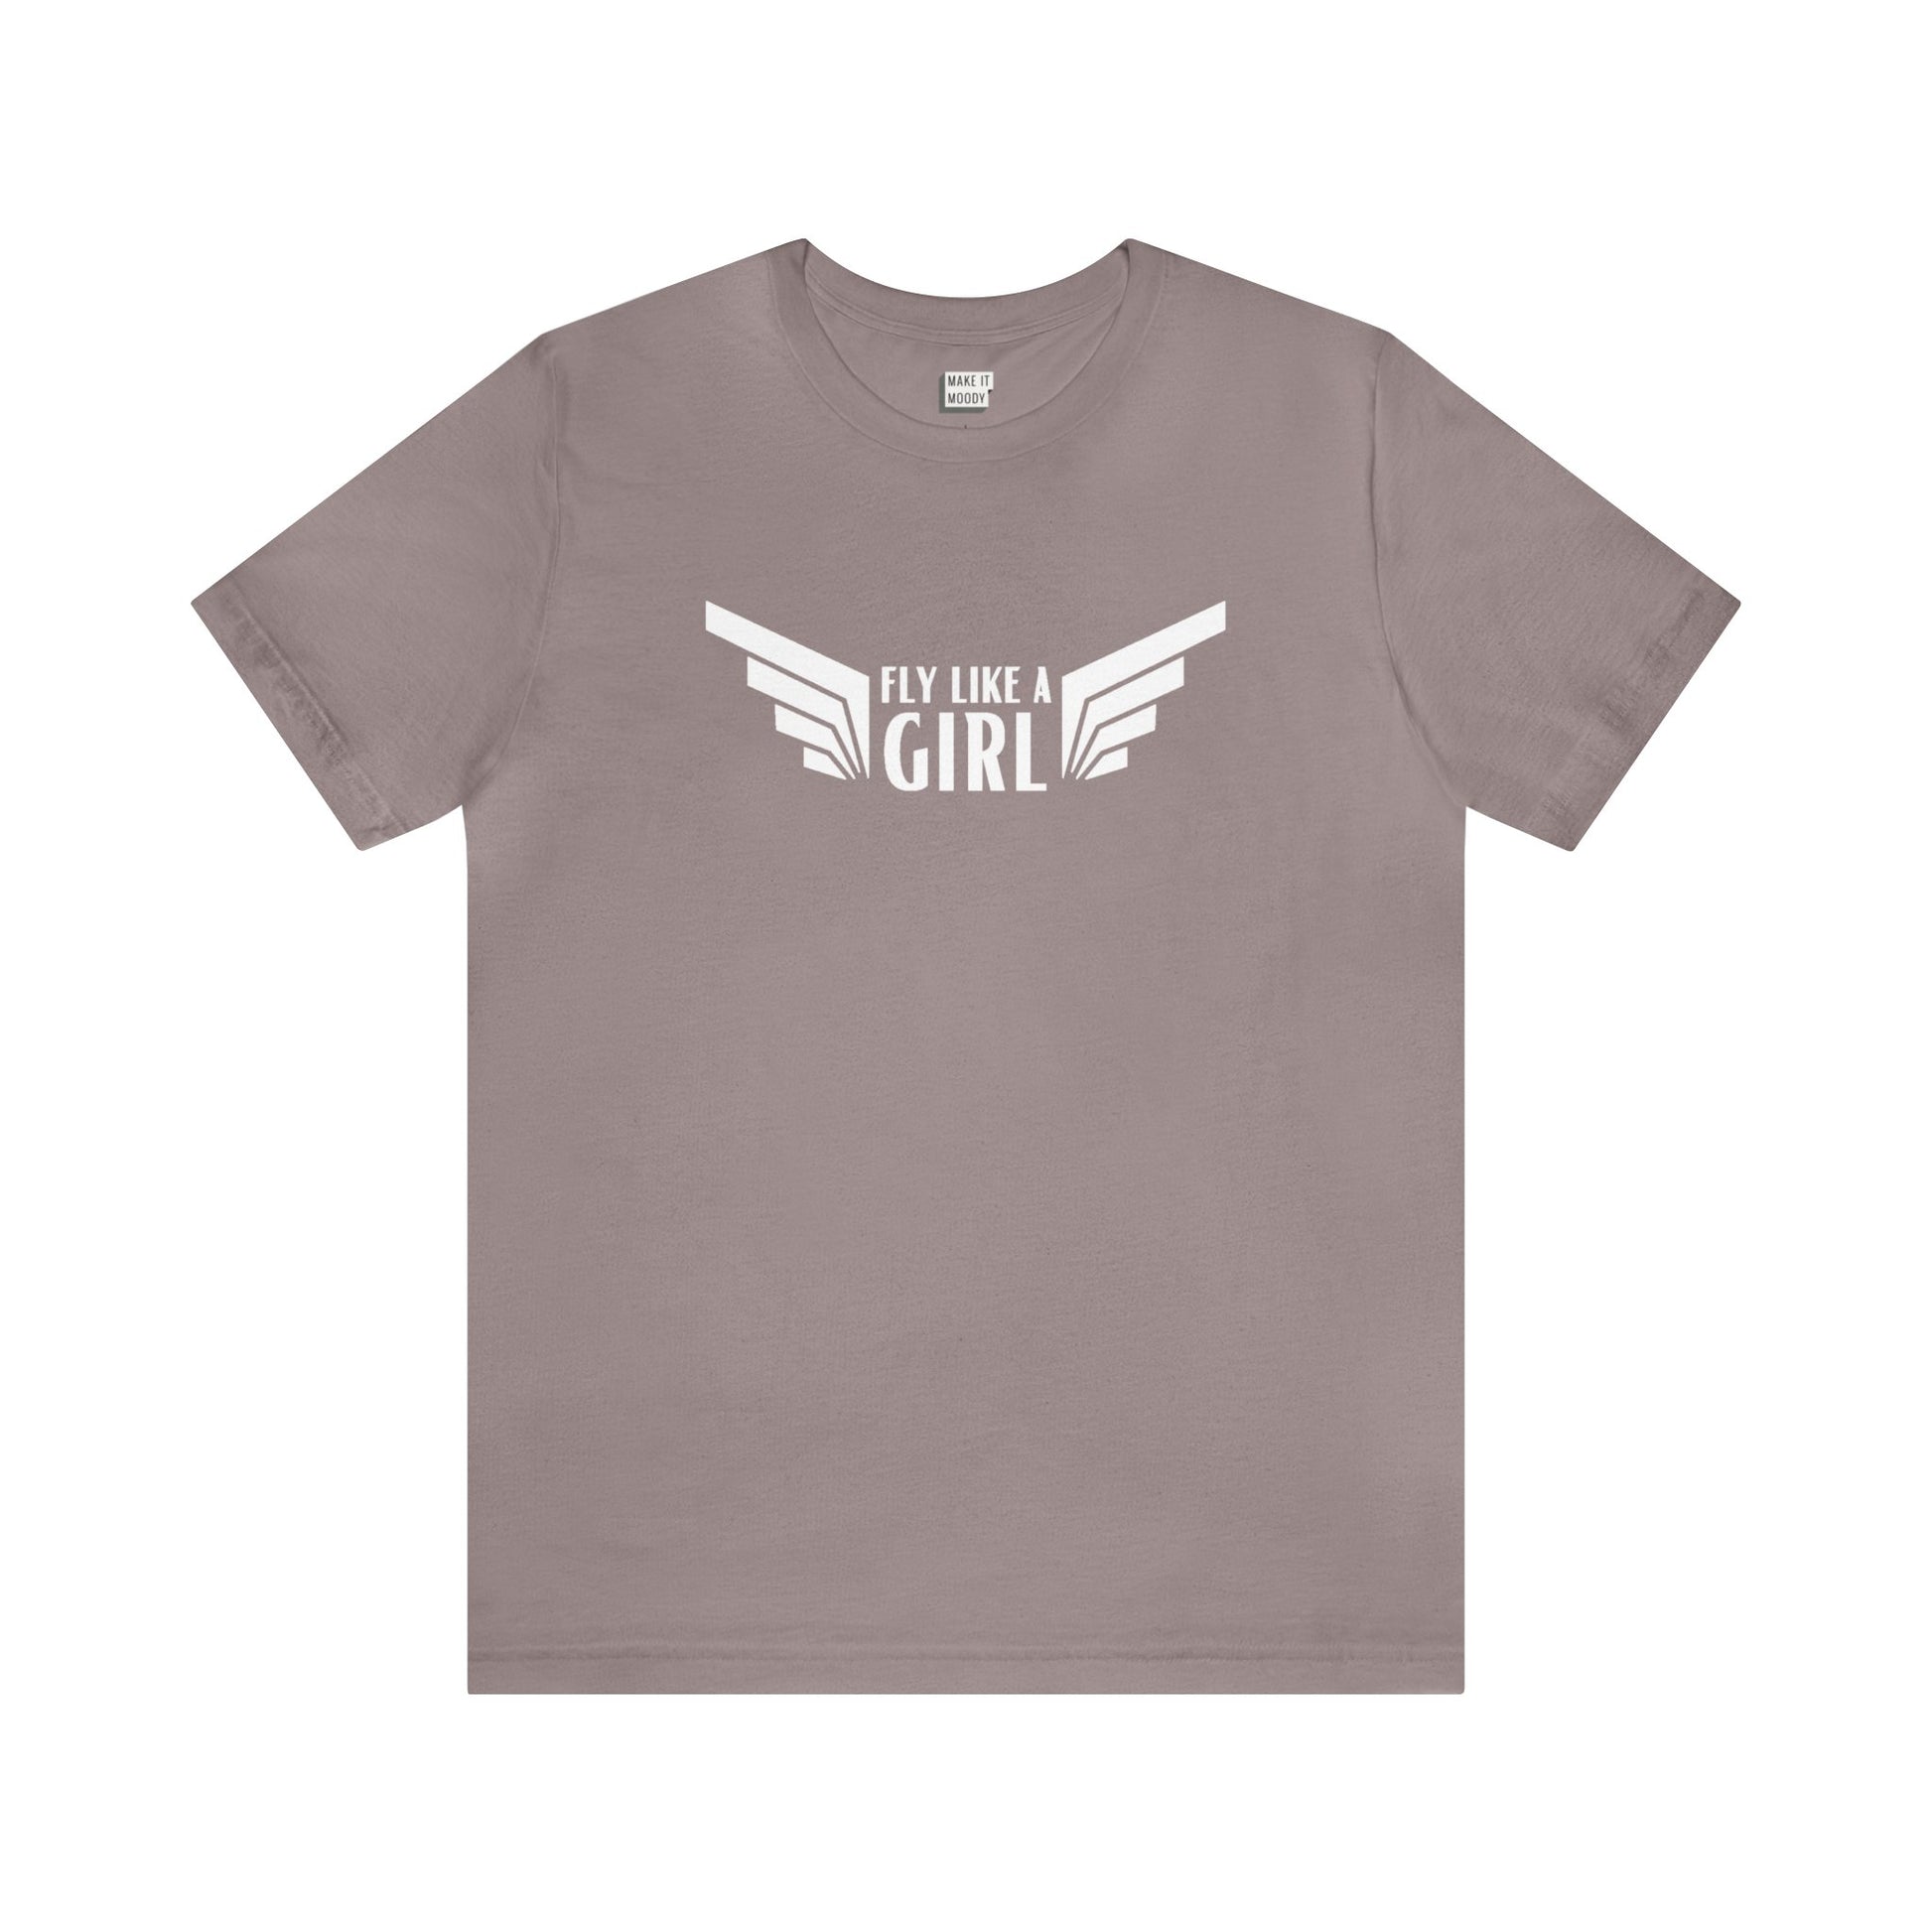 aviation tshirt for women, fly like a girl, pebble brown